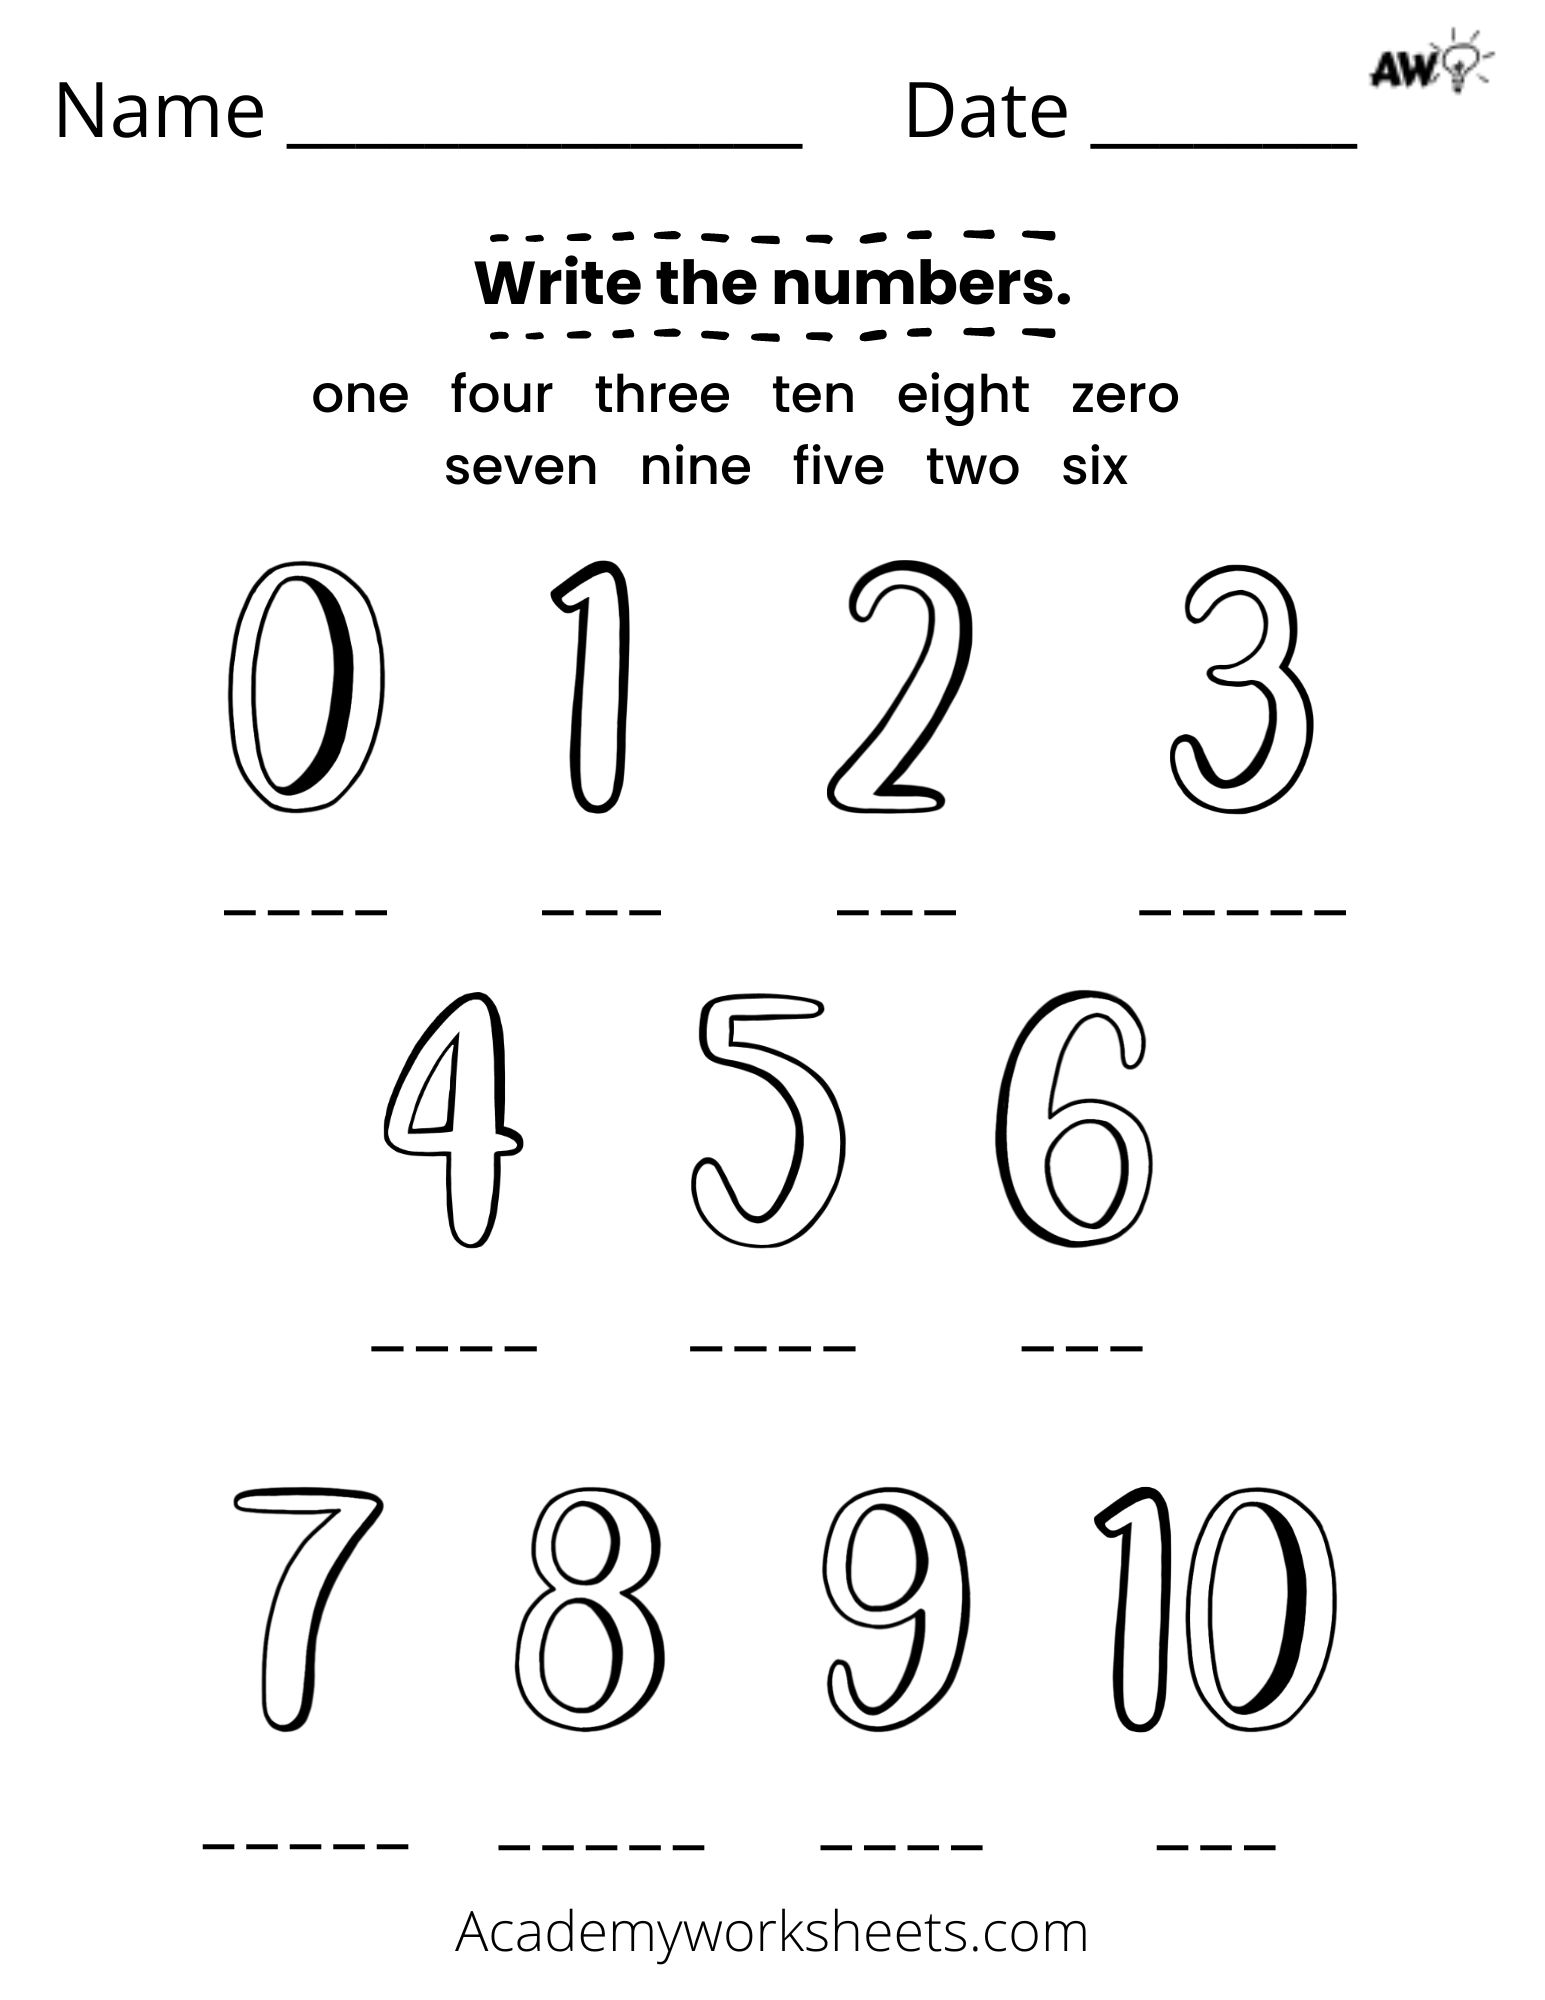 learn-counting-in-words-effectively-academy-worksheets